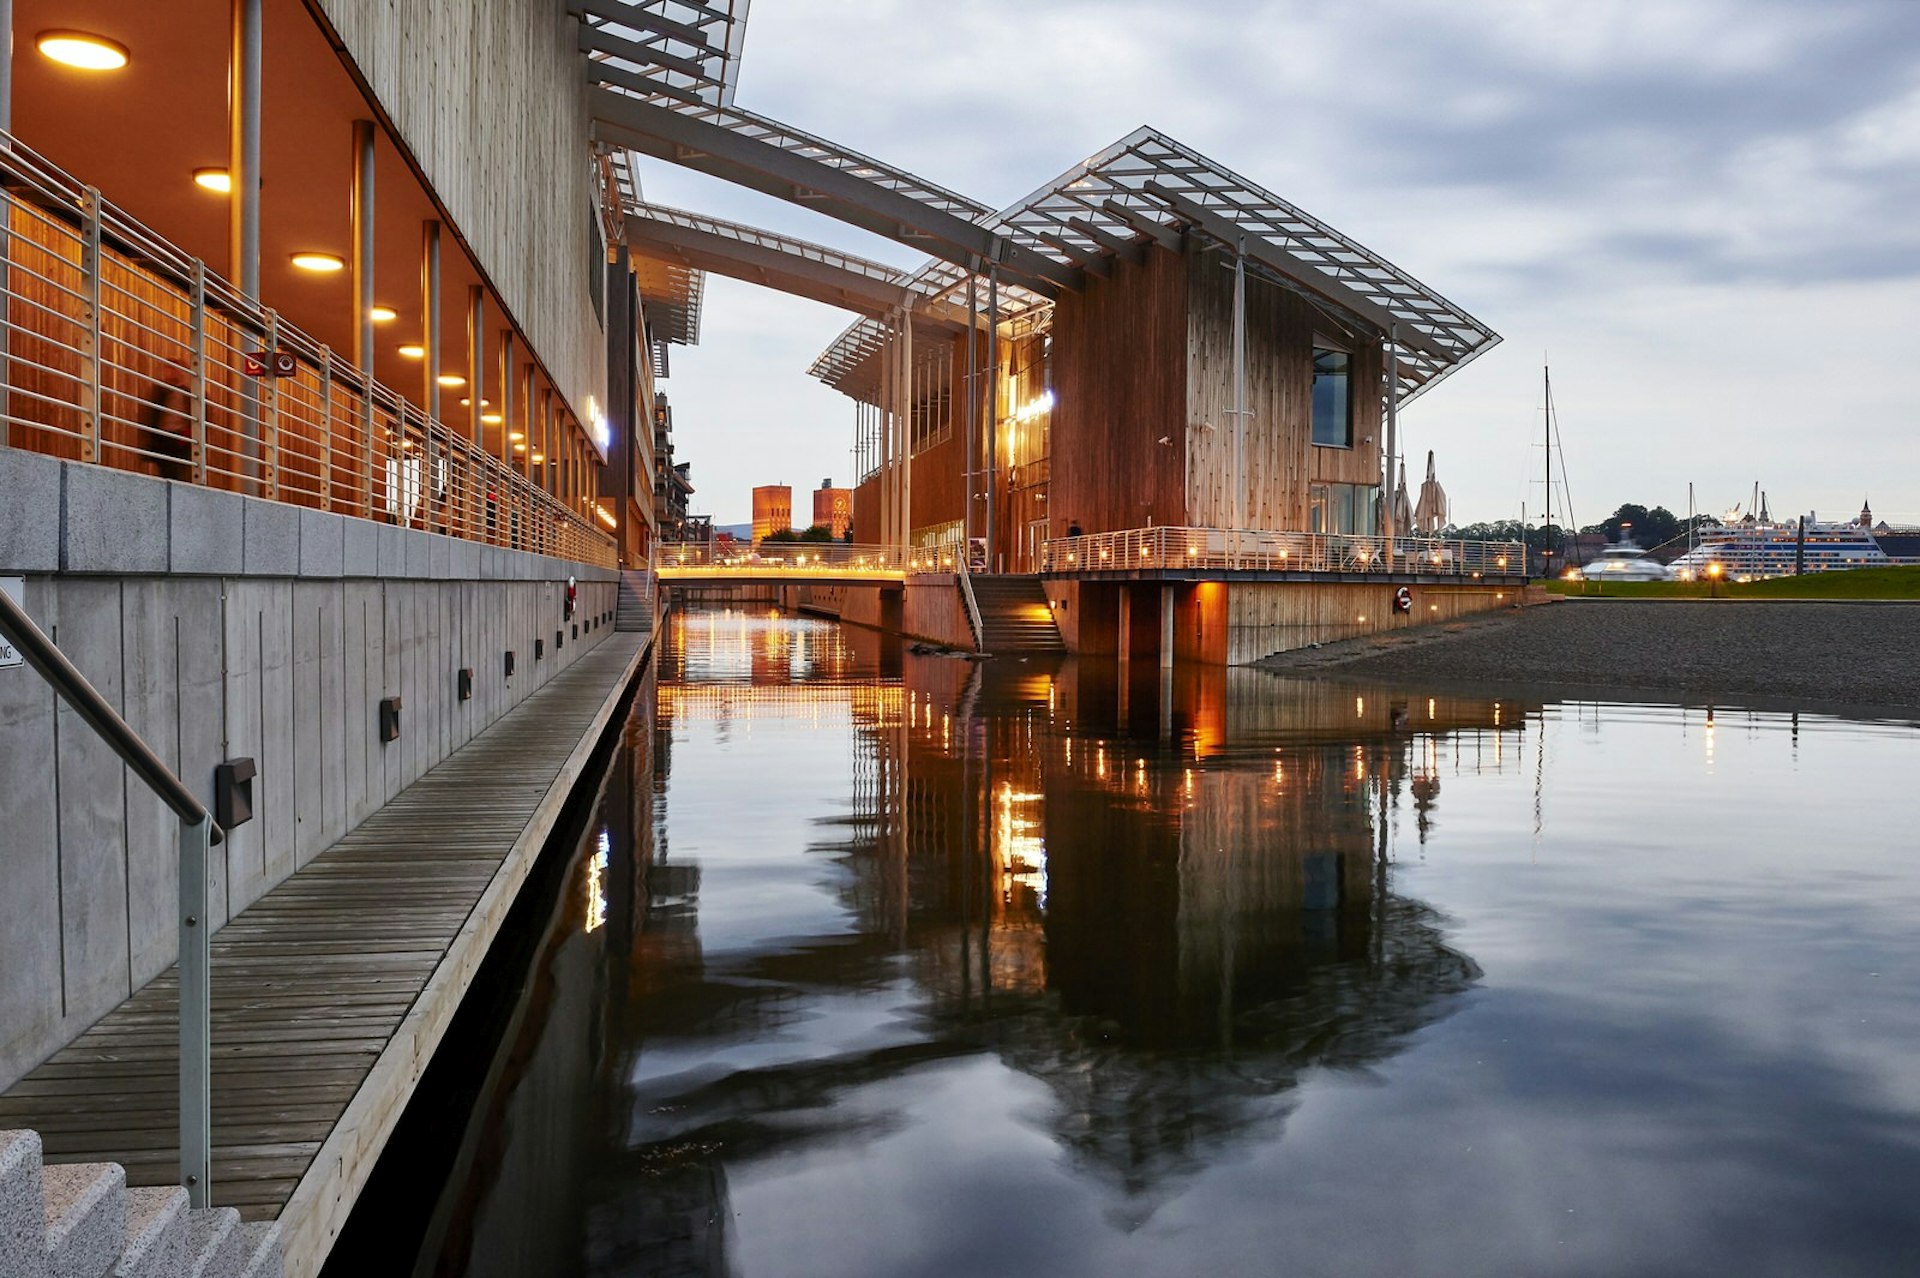 The Renzo Piano-designed Astrup Fearnley Museum in Oslo's Tjuvholmen district © Andrea Pistolesi / Getty Images